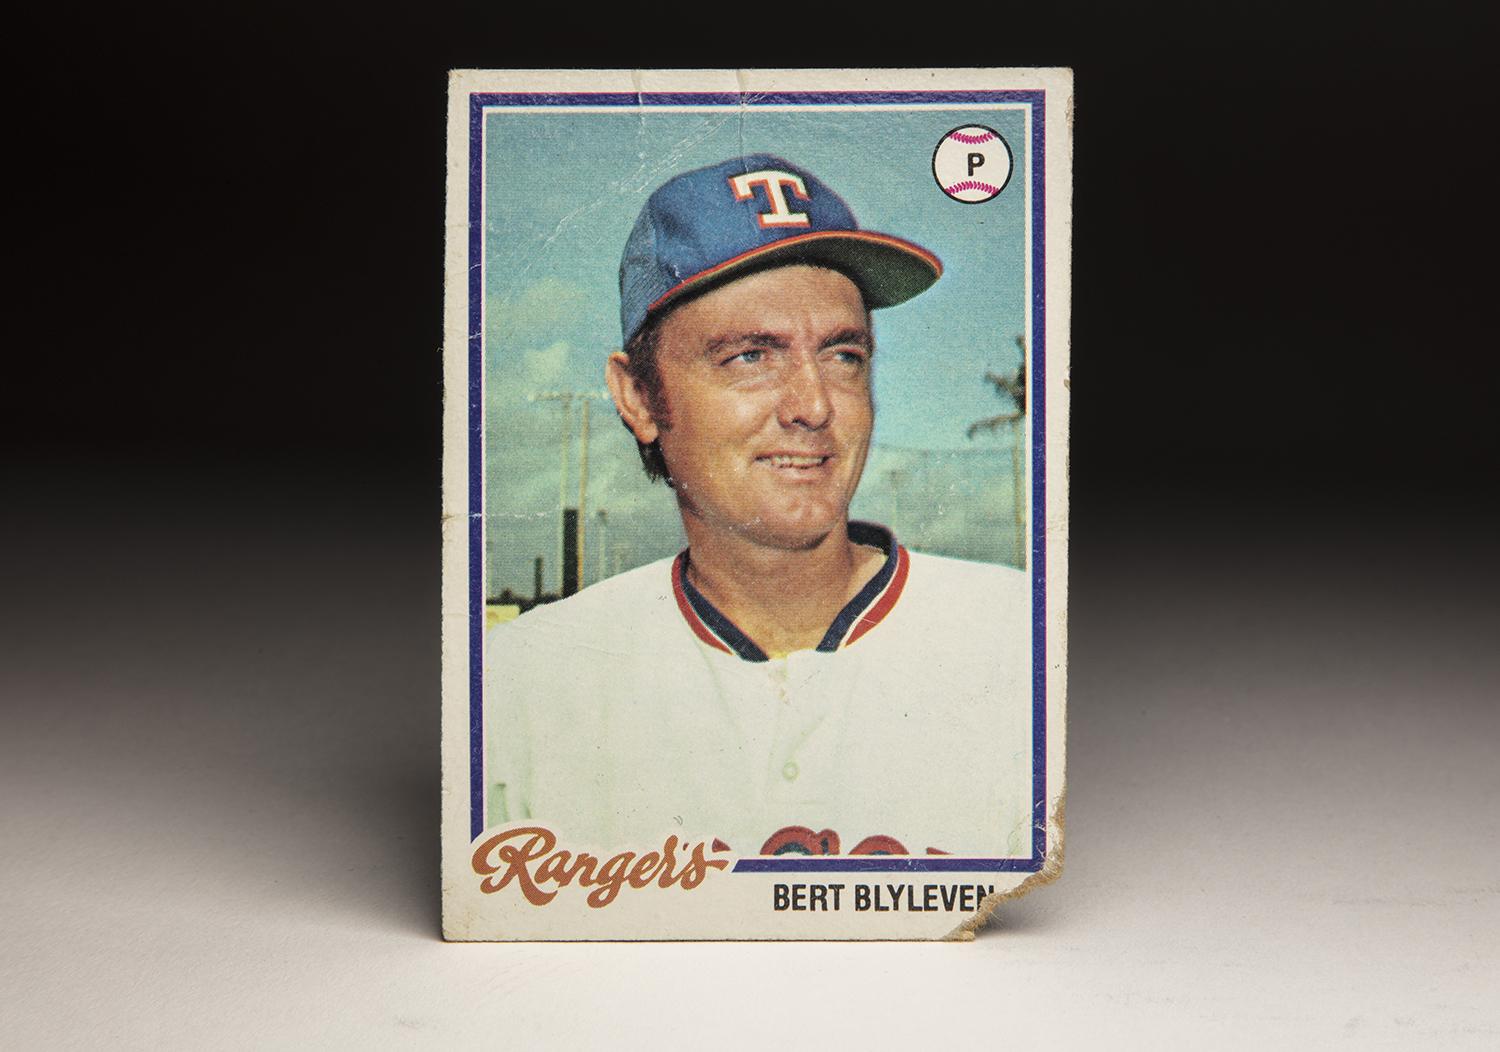 1976 Topps Traded: The Missing Cards - #235T Bert Blyleven in 2023